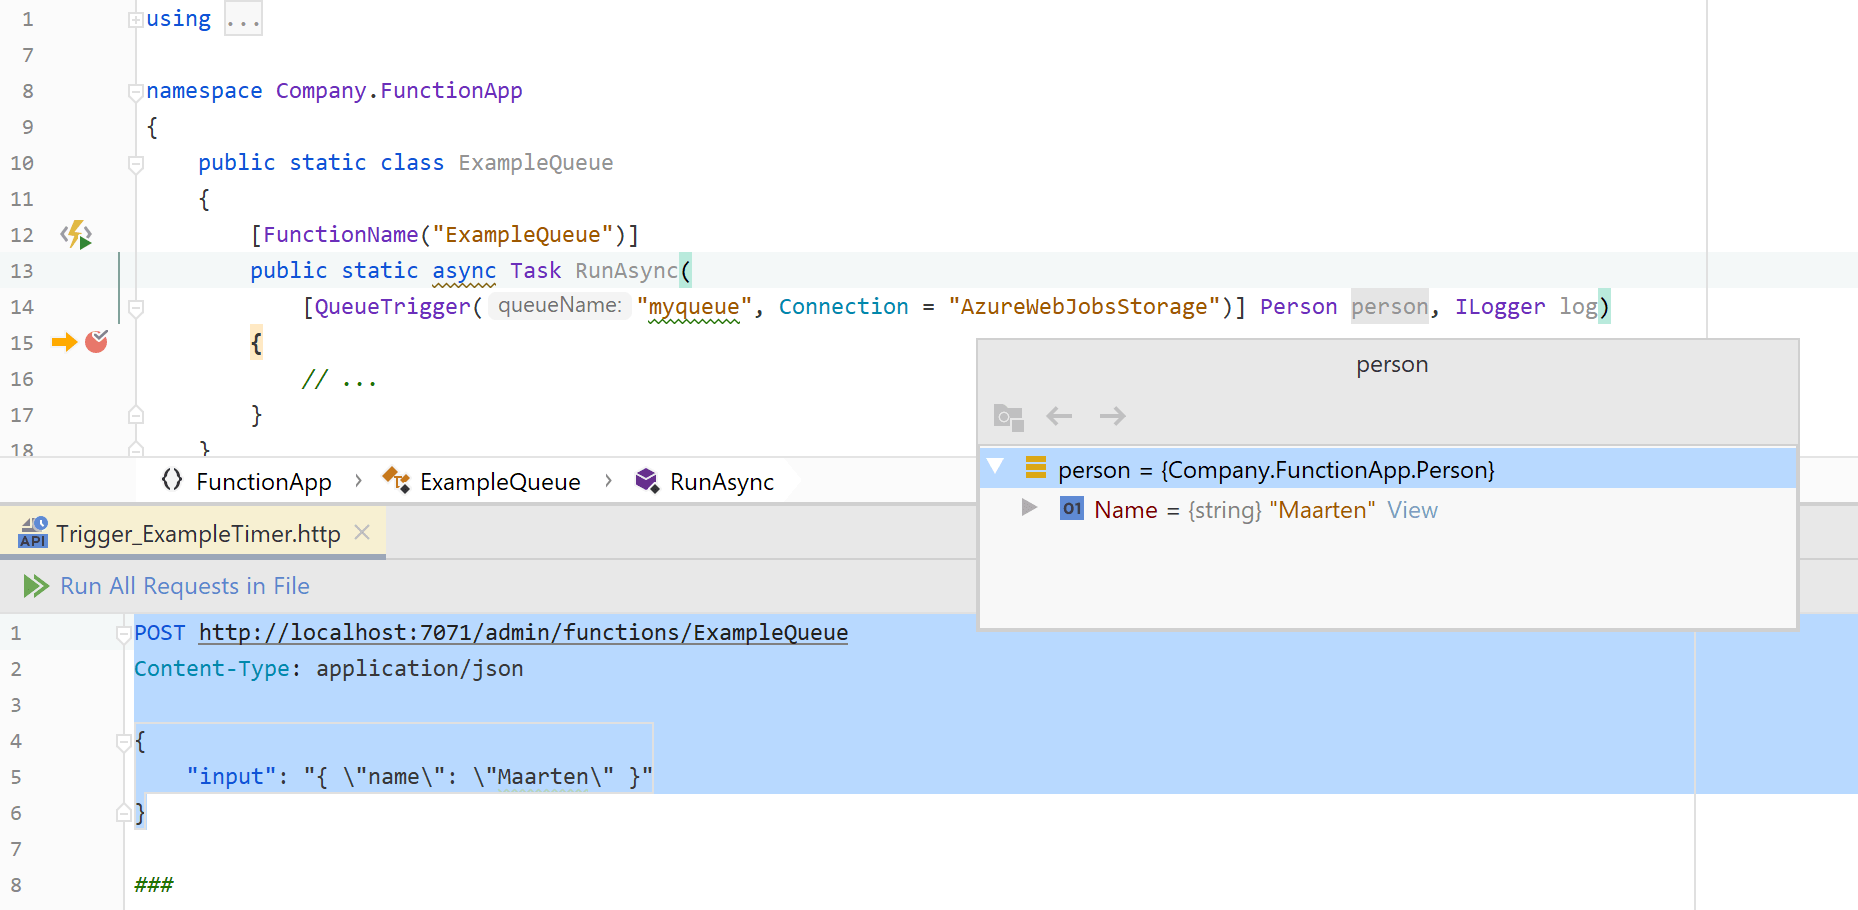 Invoke Azure Function with payload